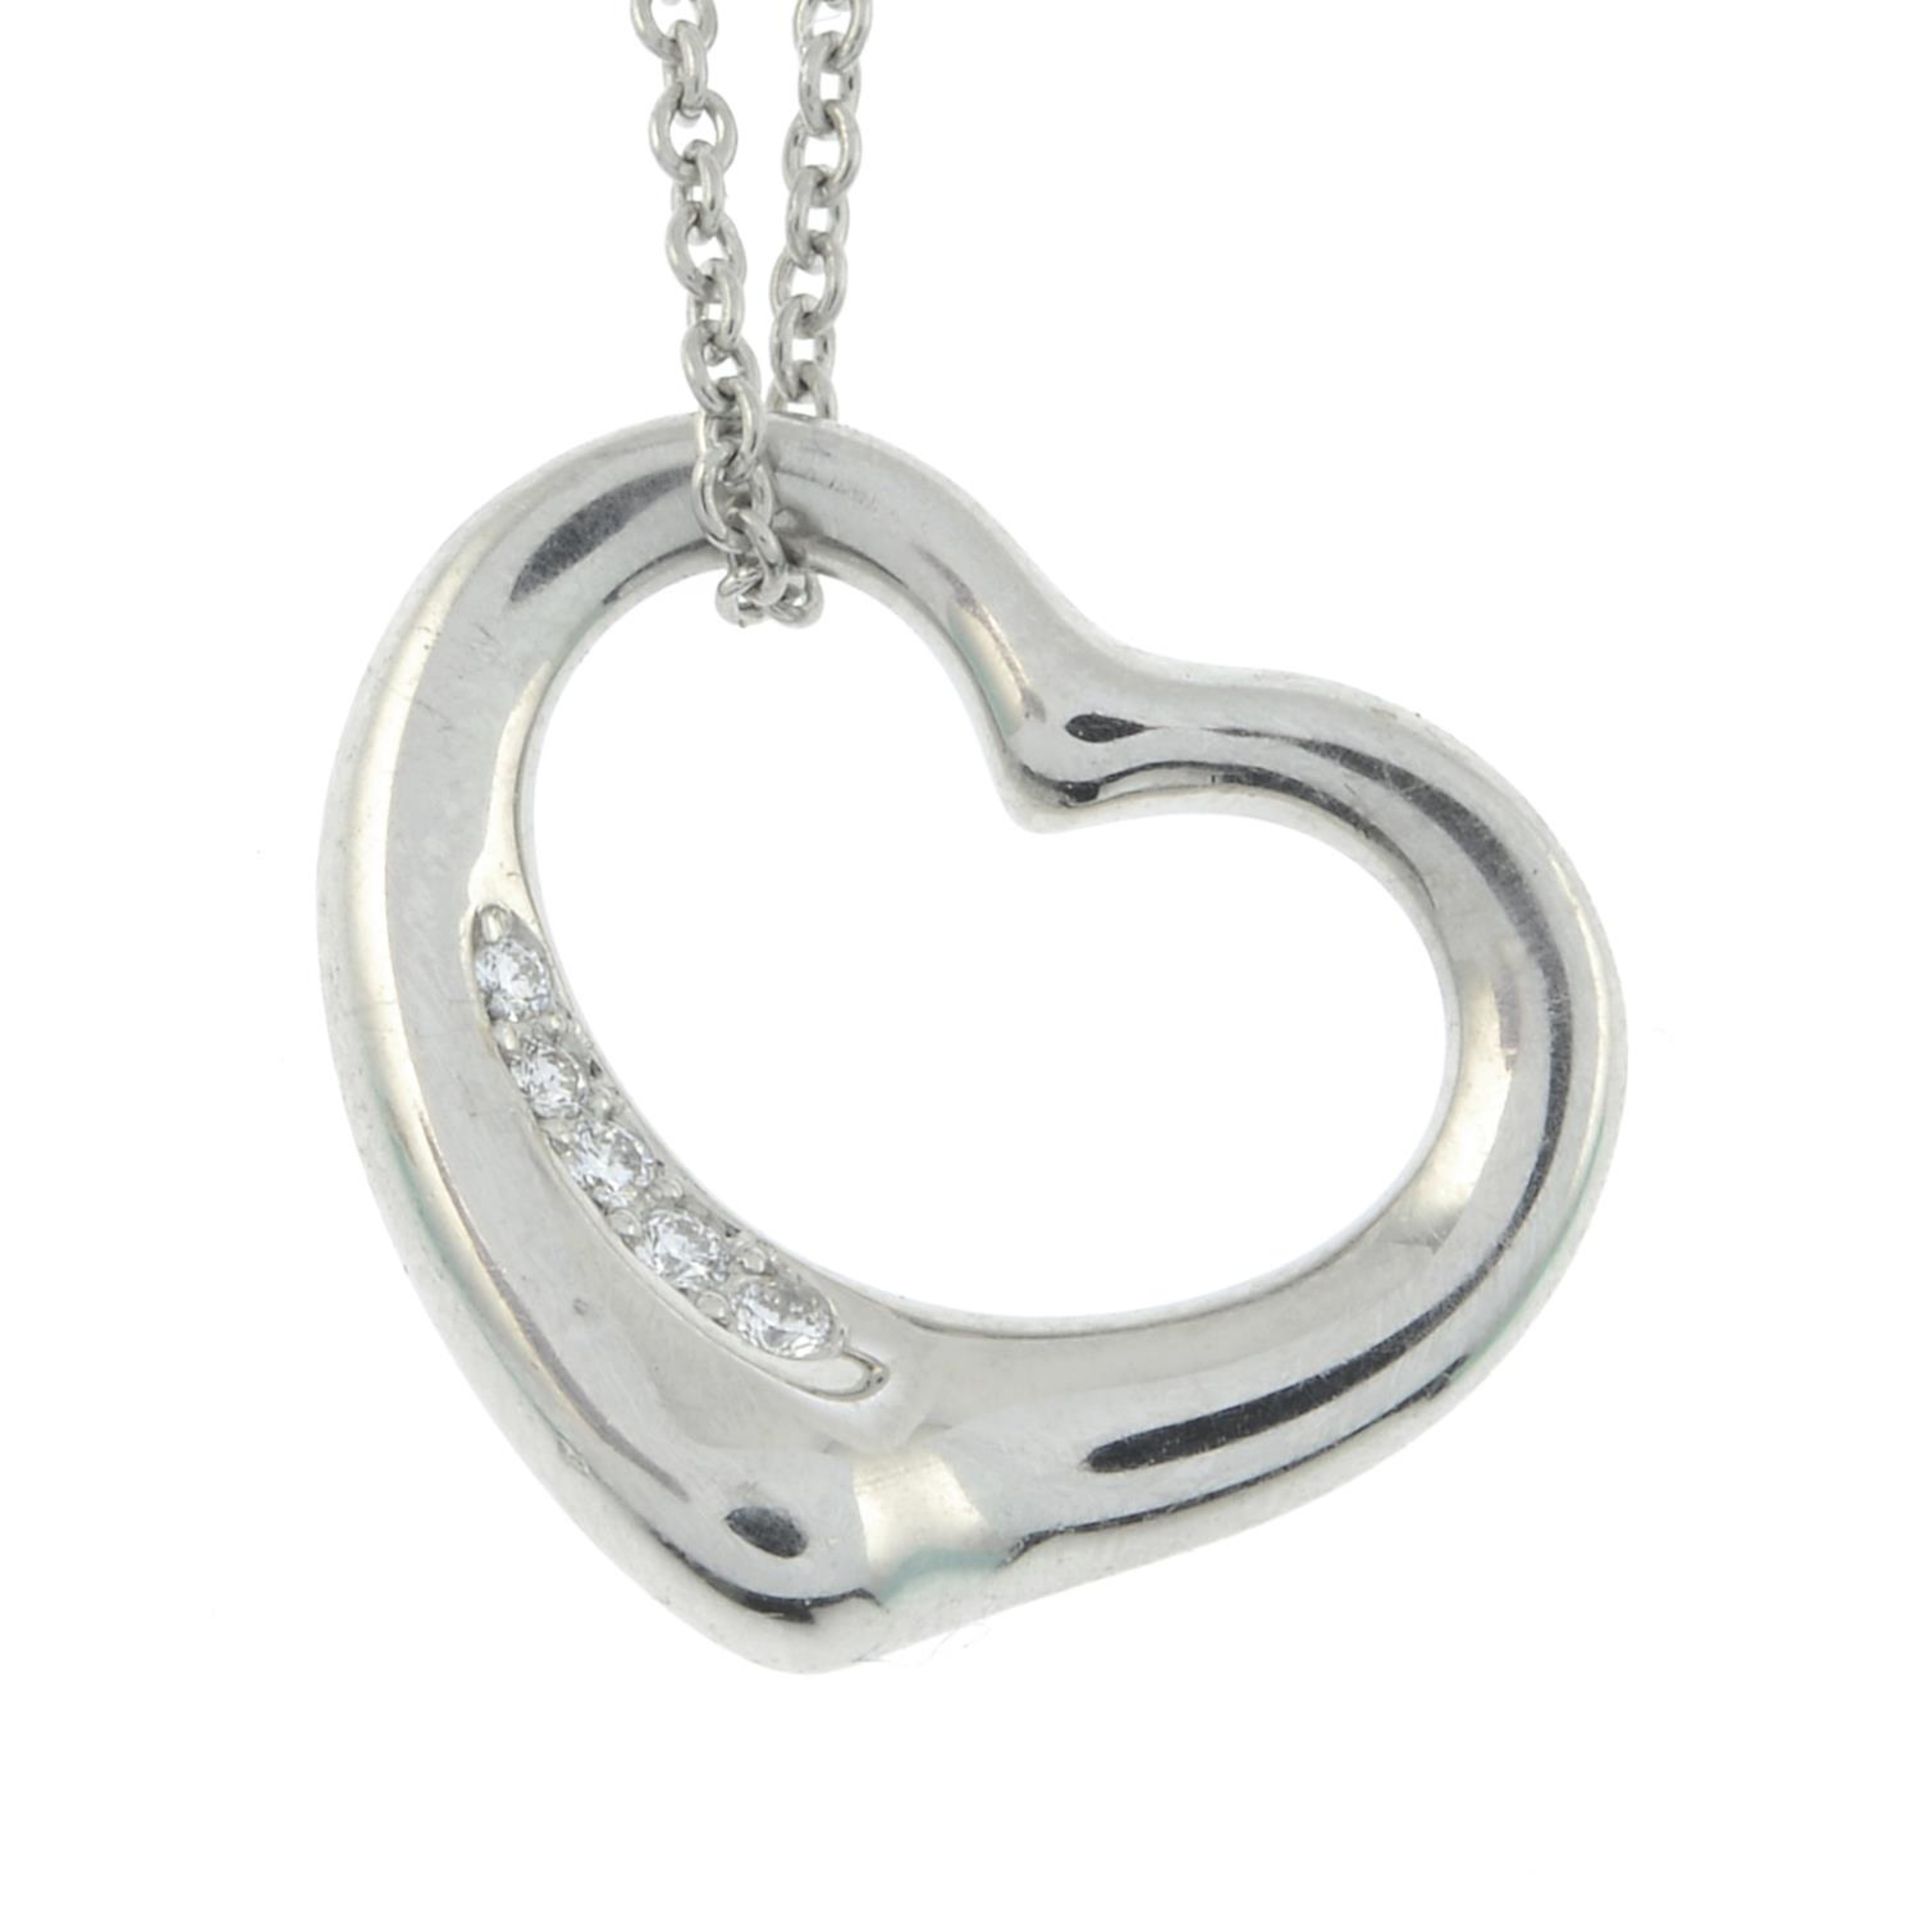 TIFFANY & CO. - an 'Open Heart' pendant with chain.